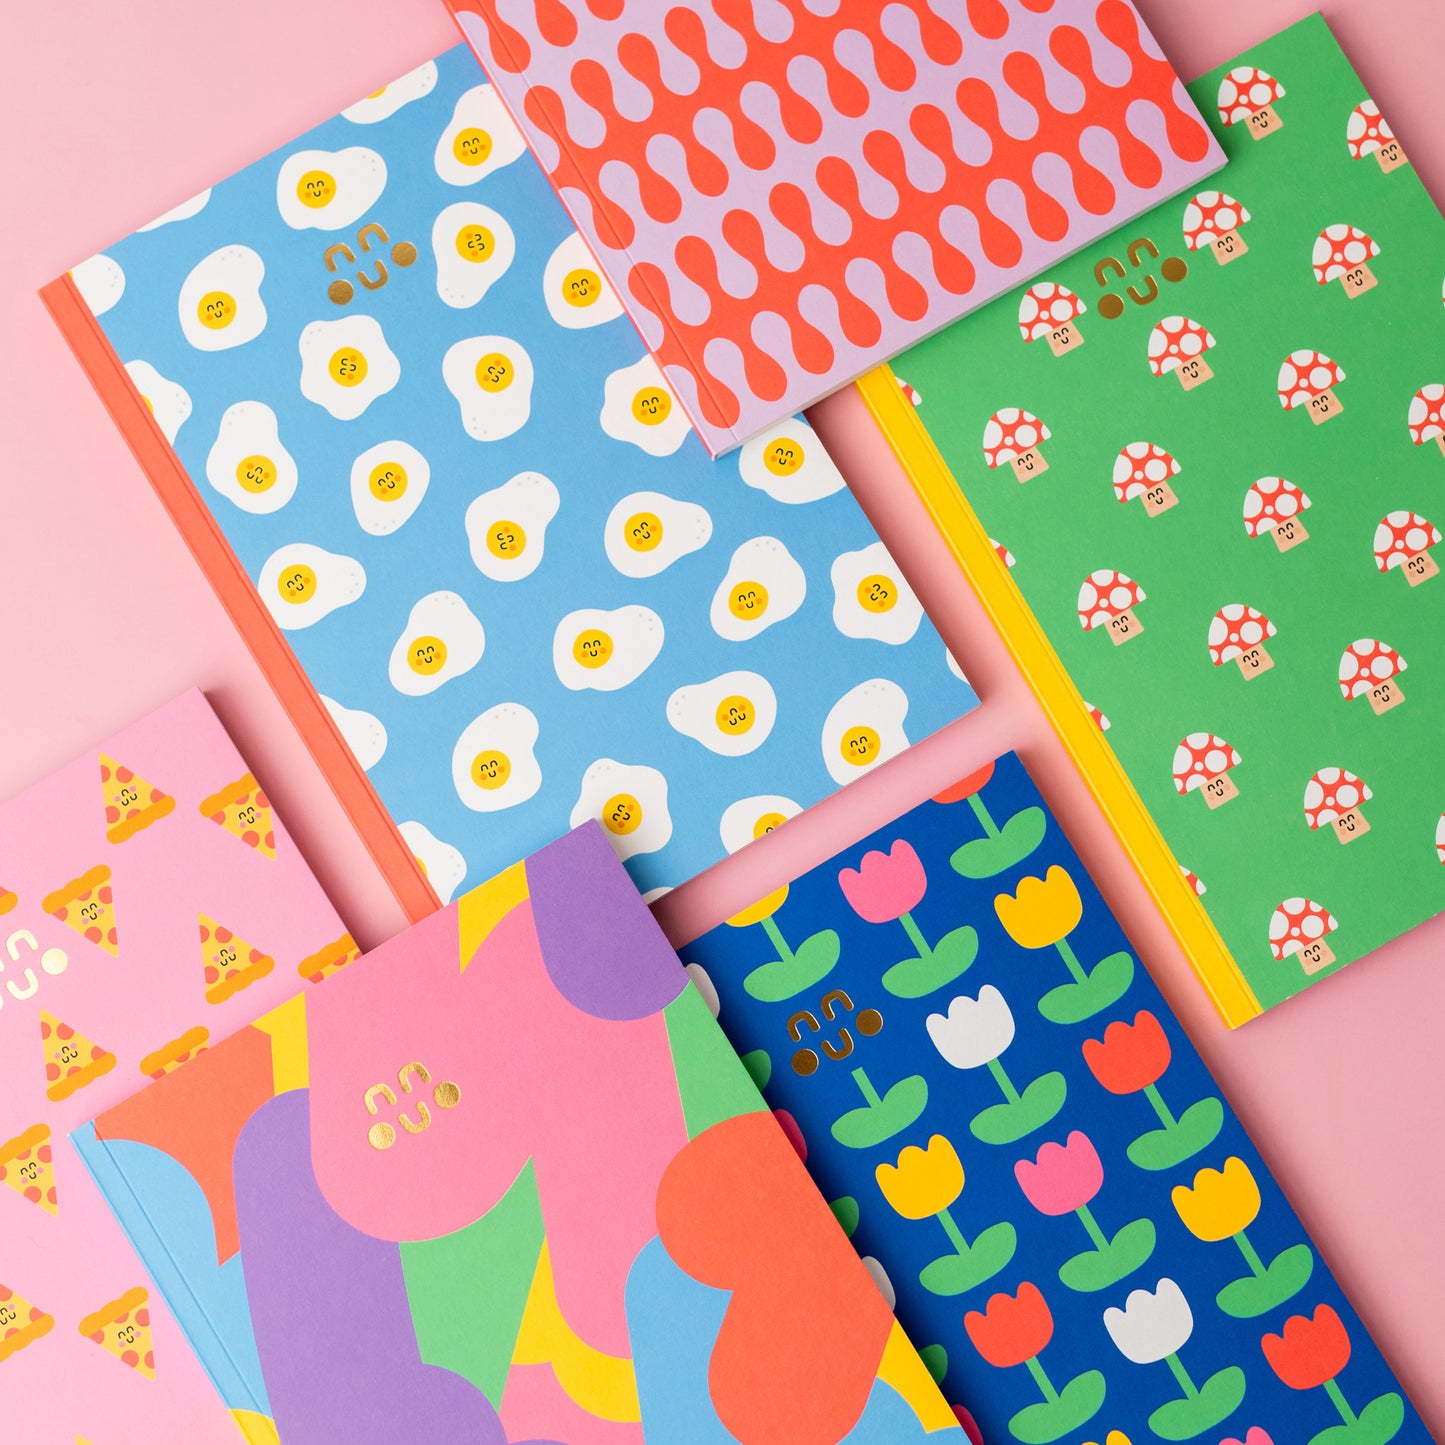 A collection of colourful notebooks with a variety of patterns